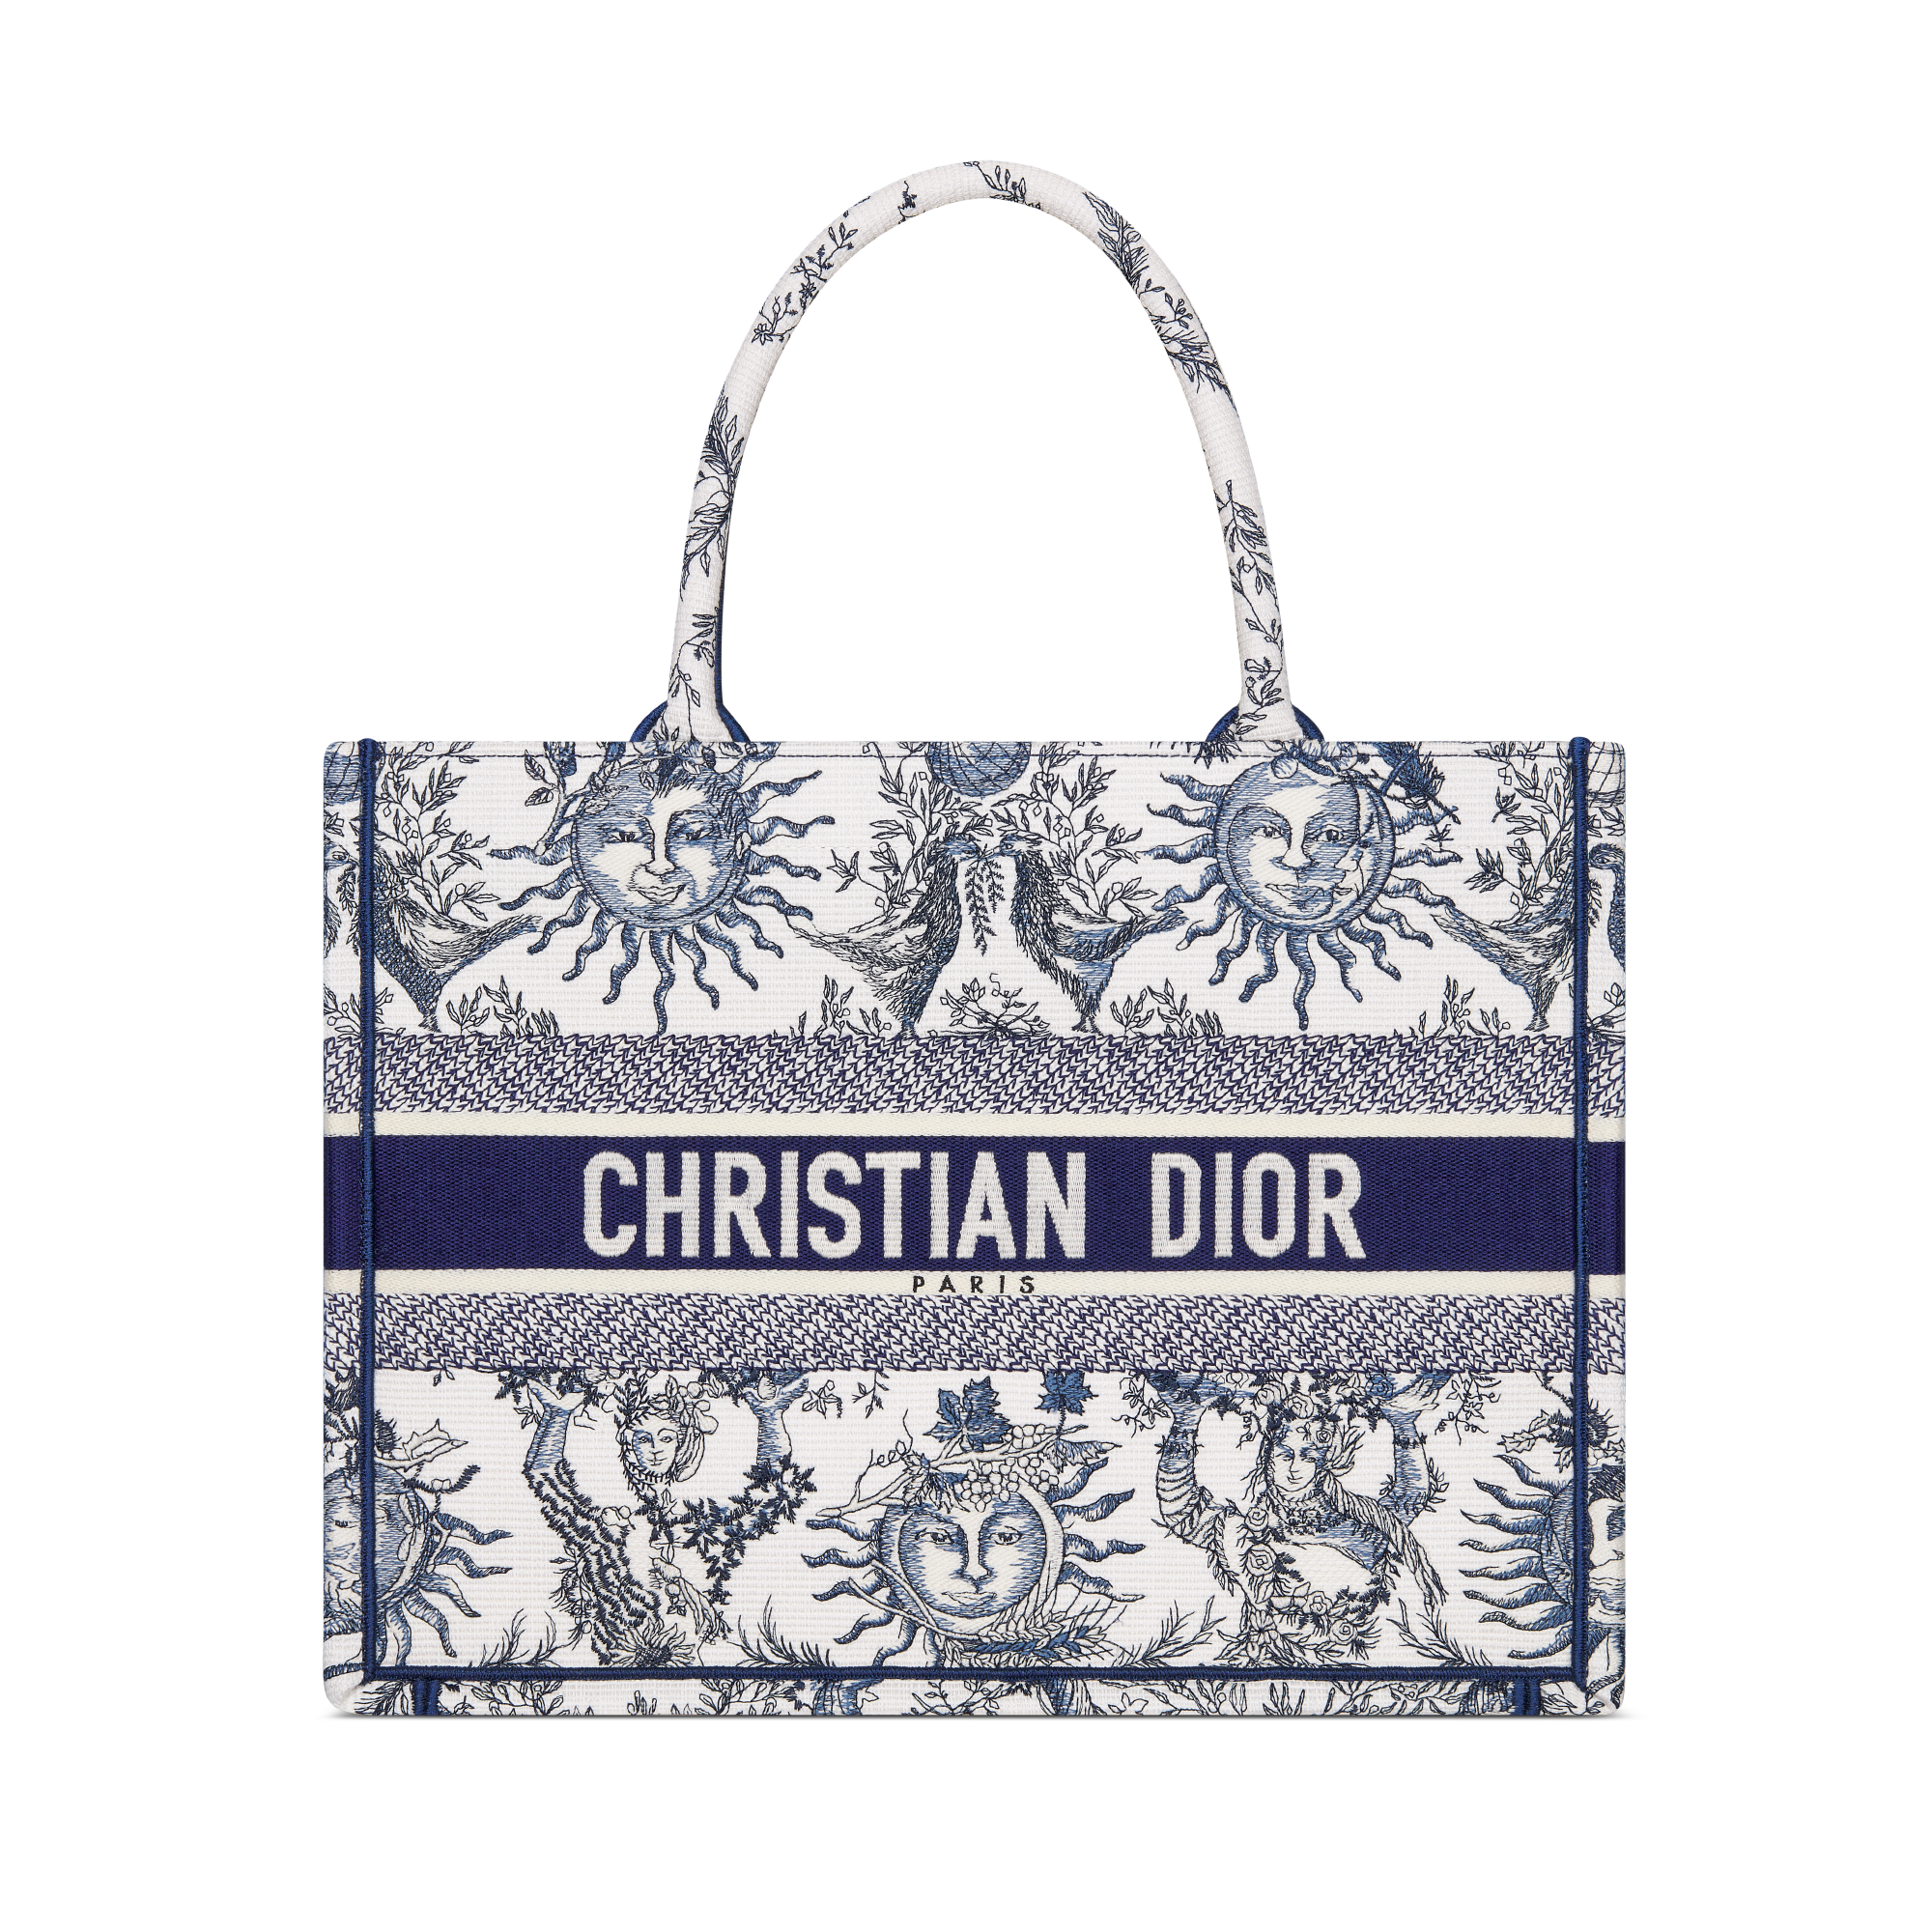 compose?brand=dior&model=small book tote&version=628&p=base:embroidery:m1296zecqm928&initials=&size=718&logic=1&initials profile=style::m1296zecqm928&size=828